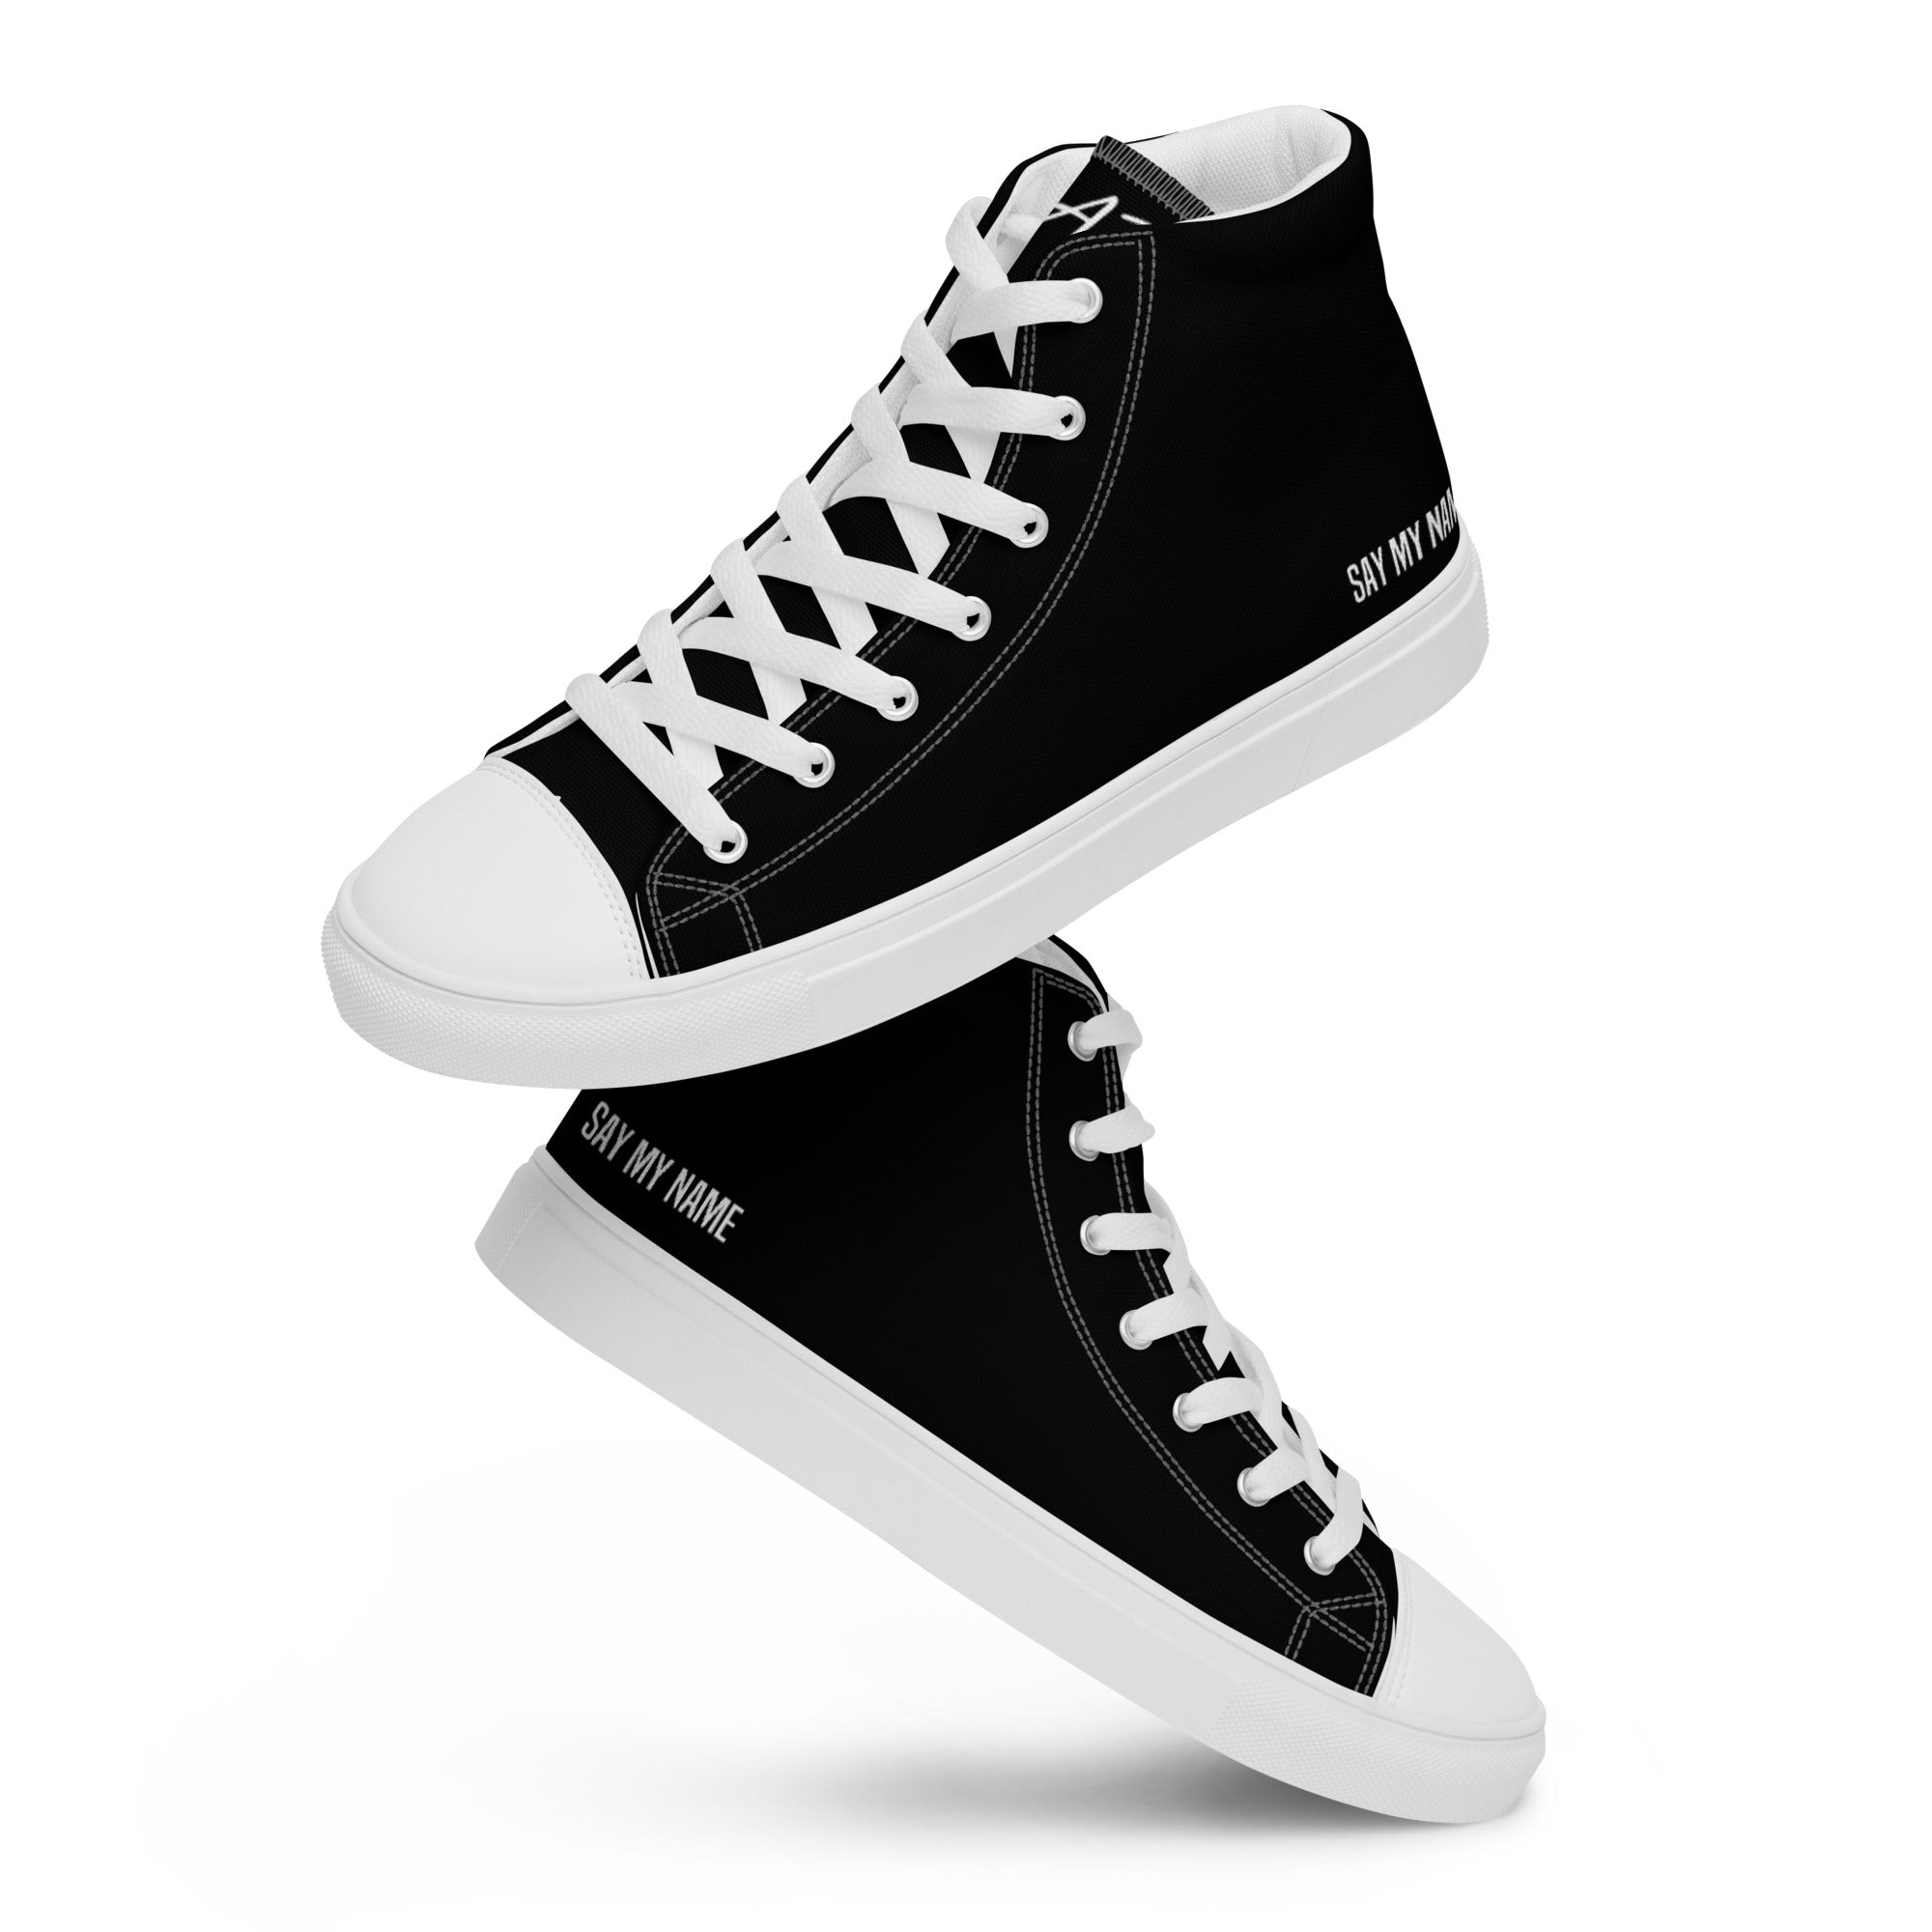 "SAY MY NAME" men's high-top black canvas sneakers